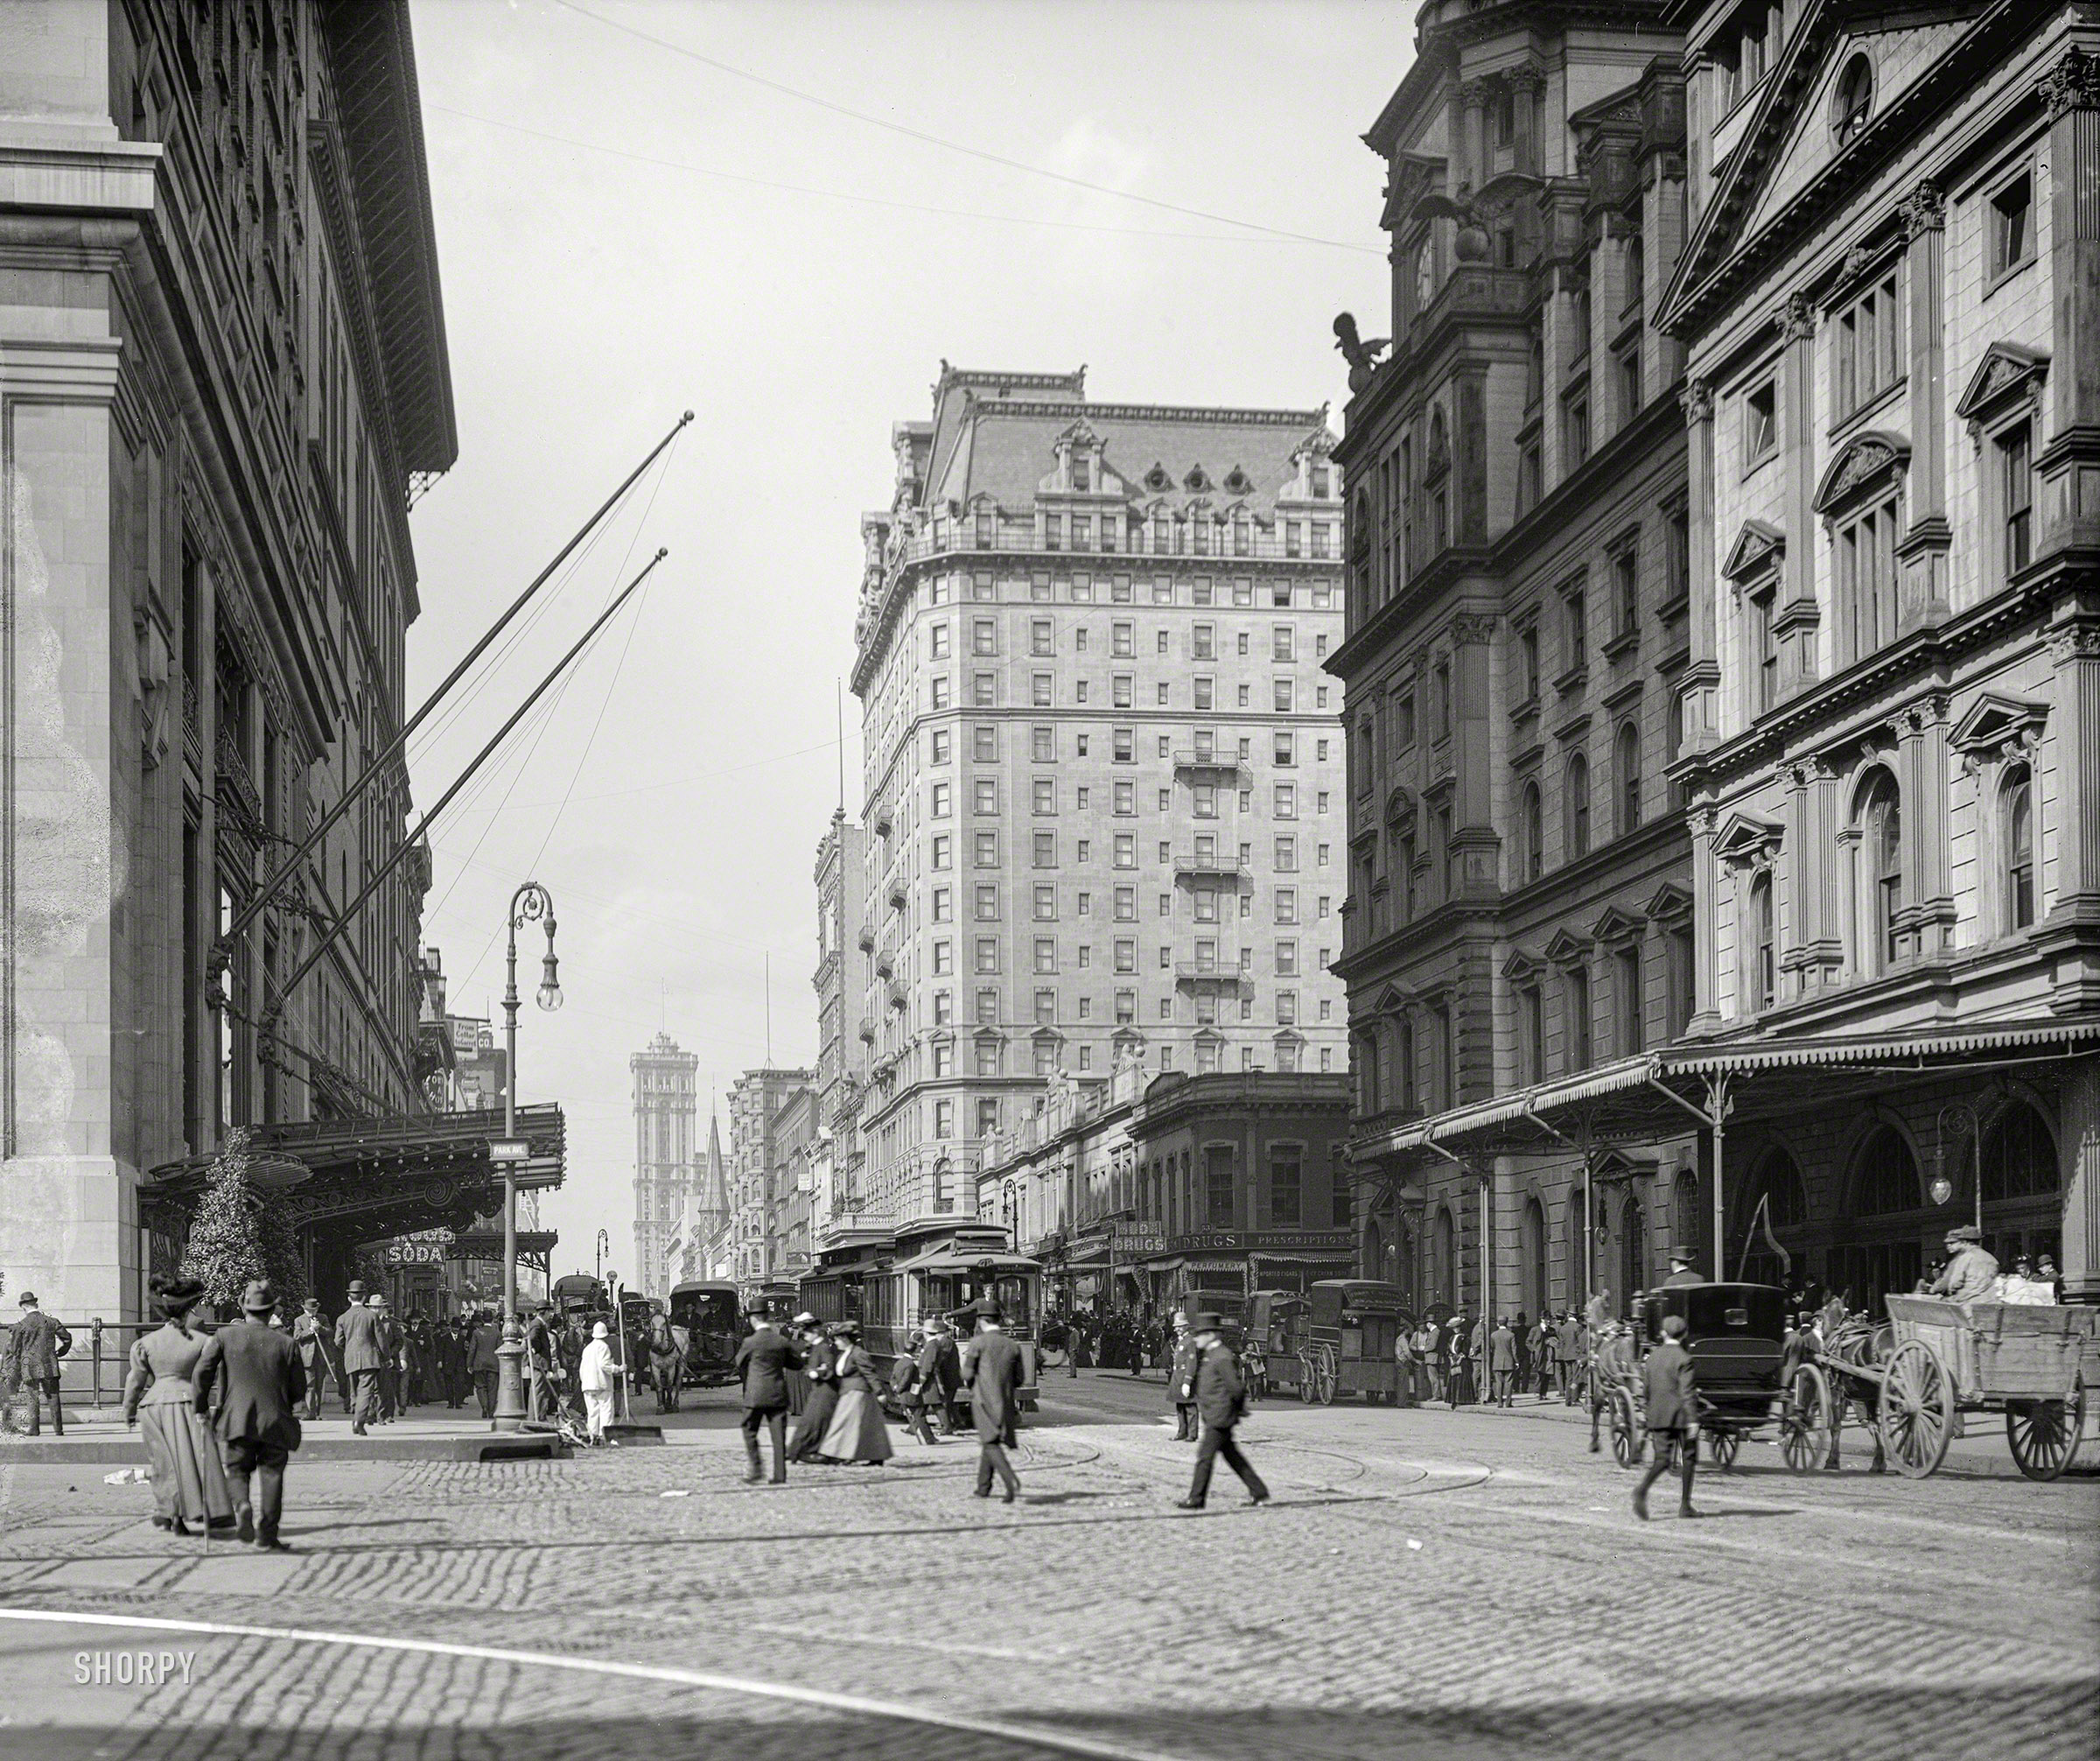 New York circa 1906. "42nd Street at Park Avenue, looking west." With Grand Central Station at right and the Hotel Manhattan center stage. 8x10 inch glass negative. View full size.